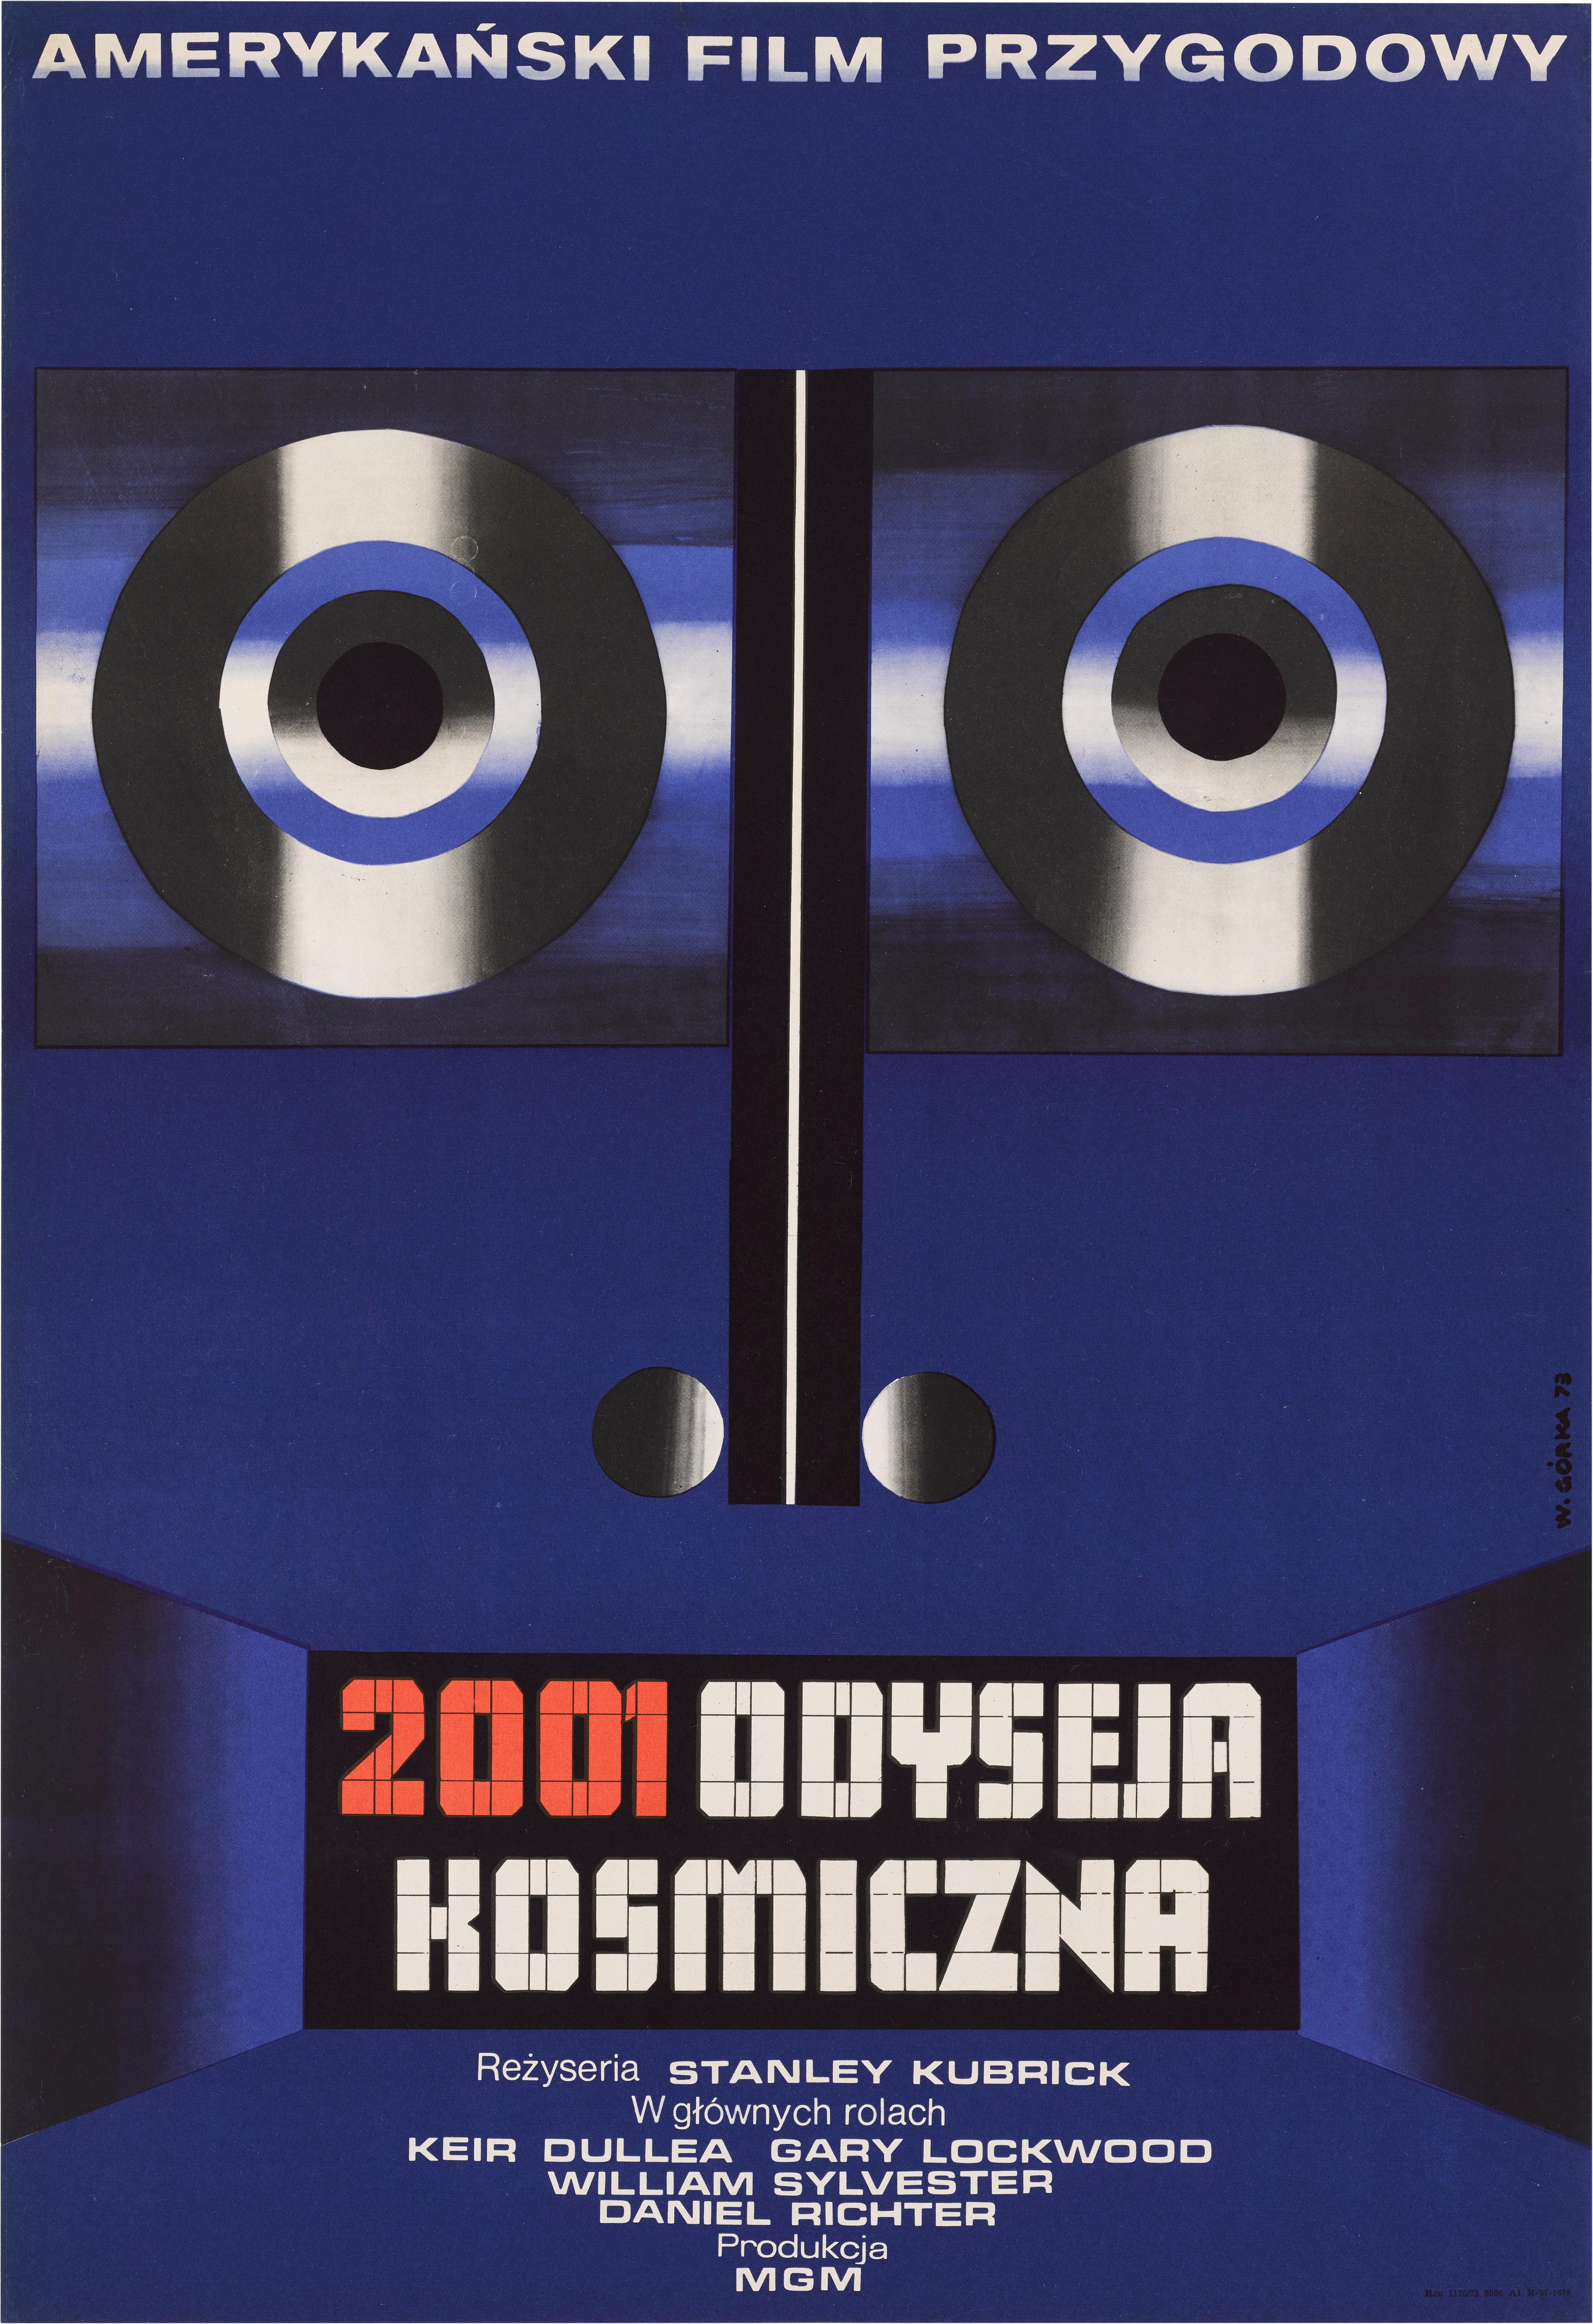 Original Polish movie poster for Stanley Kubrick's 2001: A Space Odyssey The artist Wiktor Gorka chose to depict Hal, the ship's computer, as the main element of this stylish Polish poster. It is a unique design, as no poster from any other country